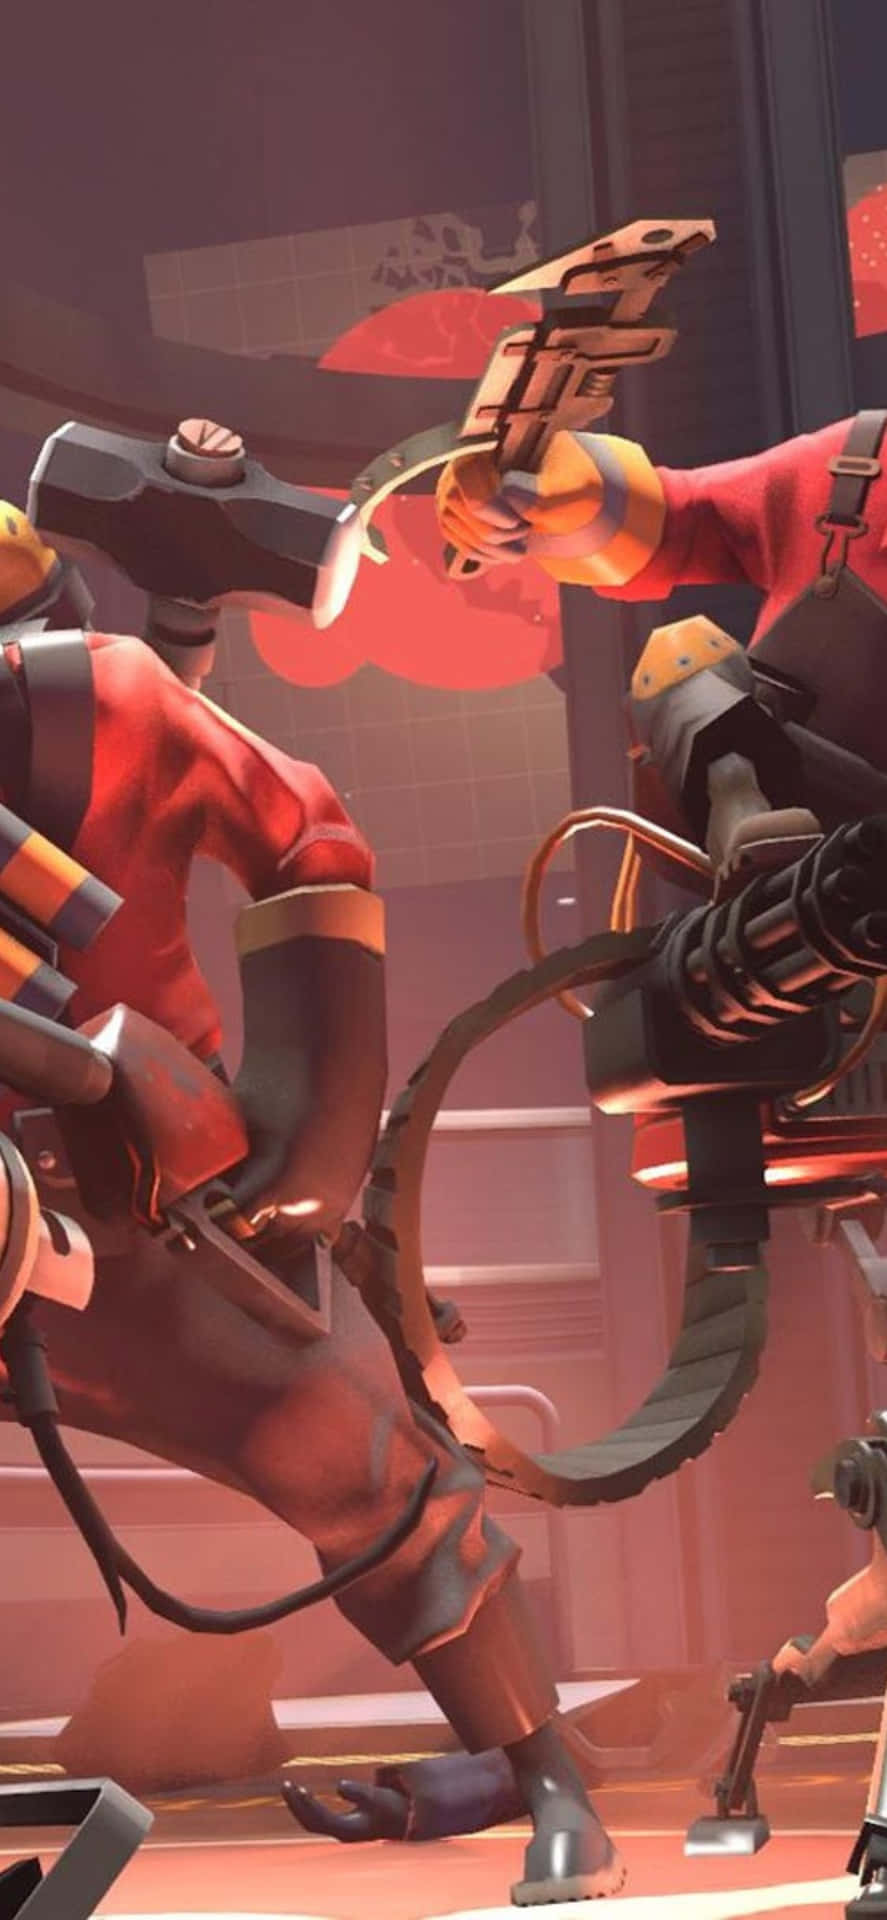 Suit up with Apple and Valve's Team Fortress 2 on iPhone Xs